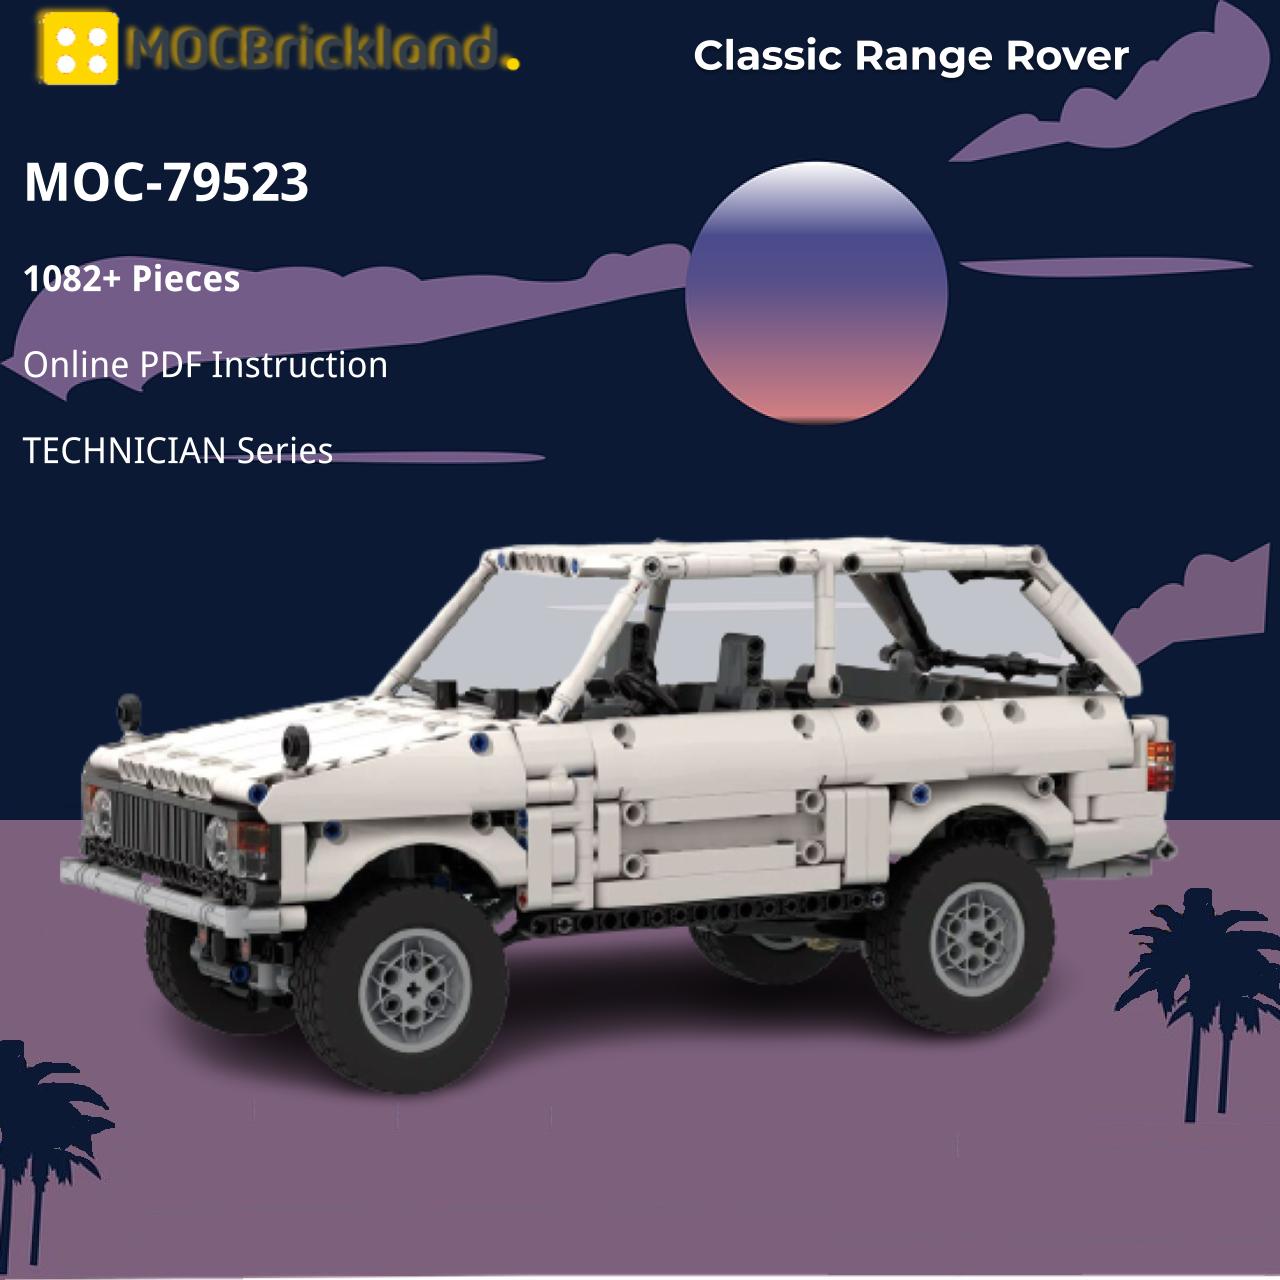 Classic Range Rover TECHNICIAN MOC-79523 by Paave WITH 1082 PIECES